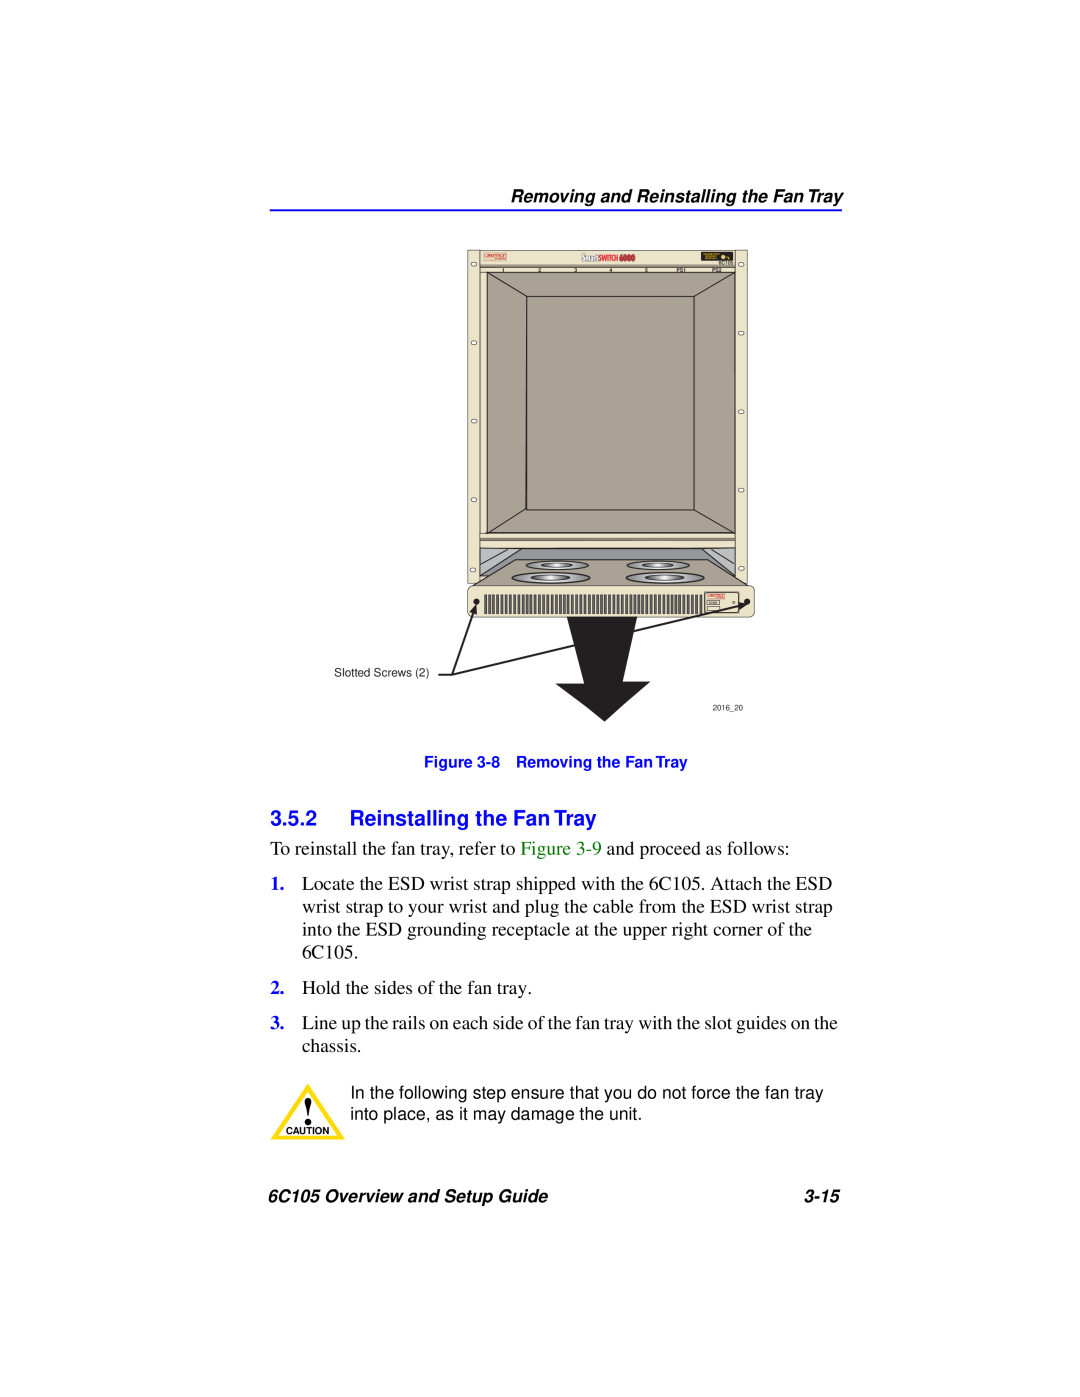 Cabletron Systems 6C105 Reinstalling the Fan Tray, In the following step ensure that you do not force the fan tray 